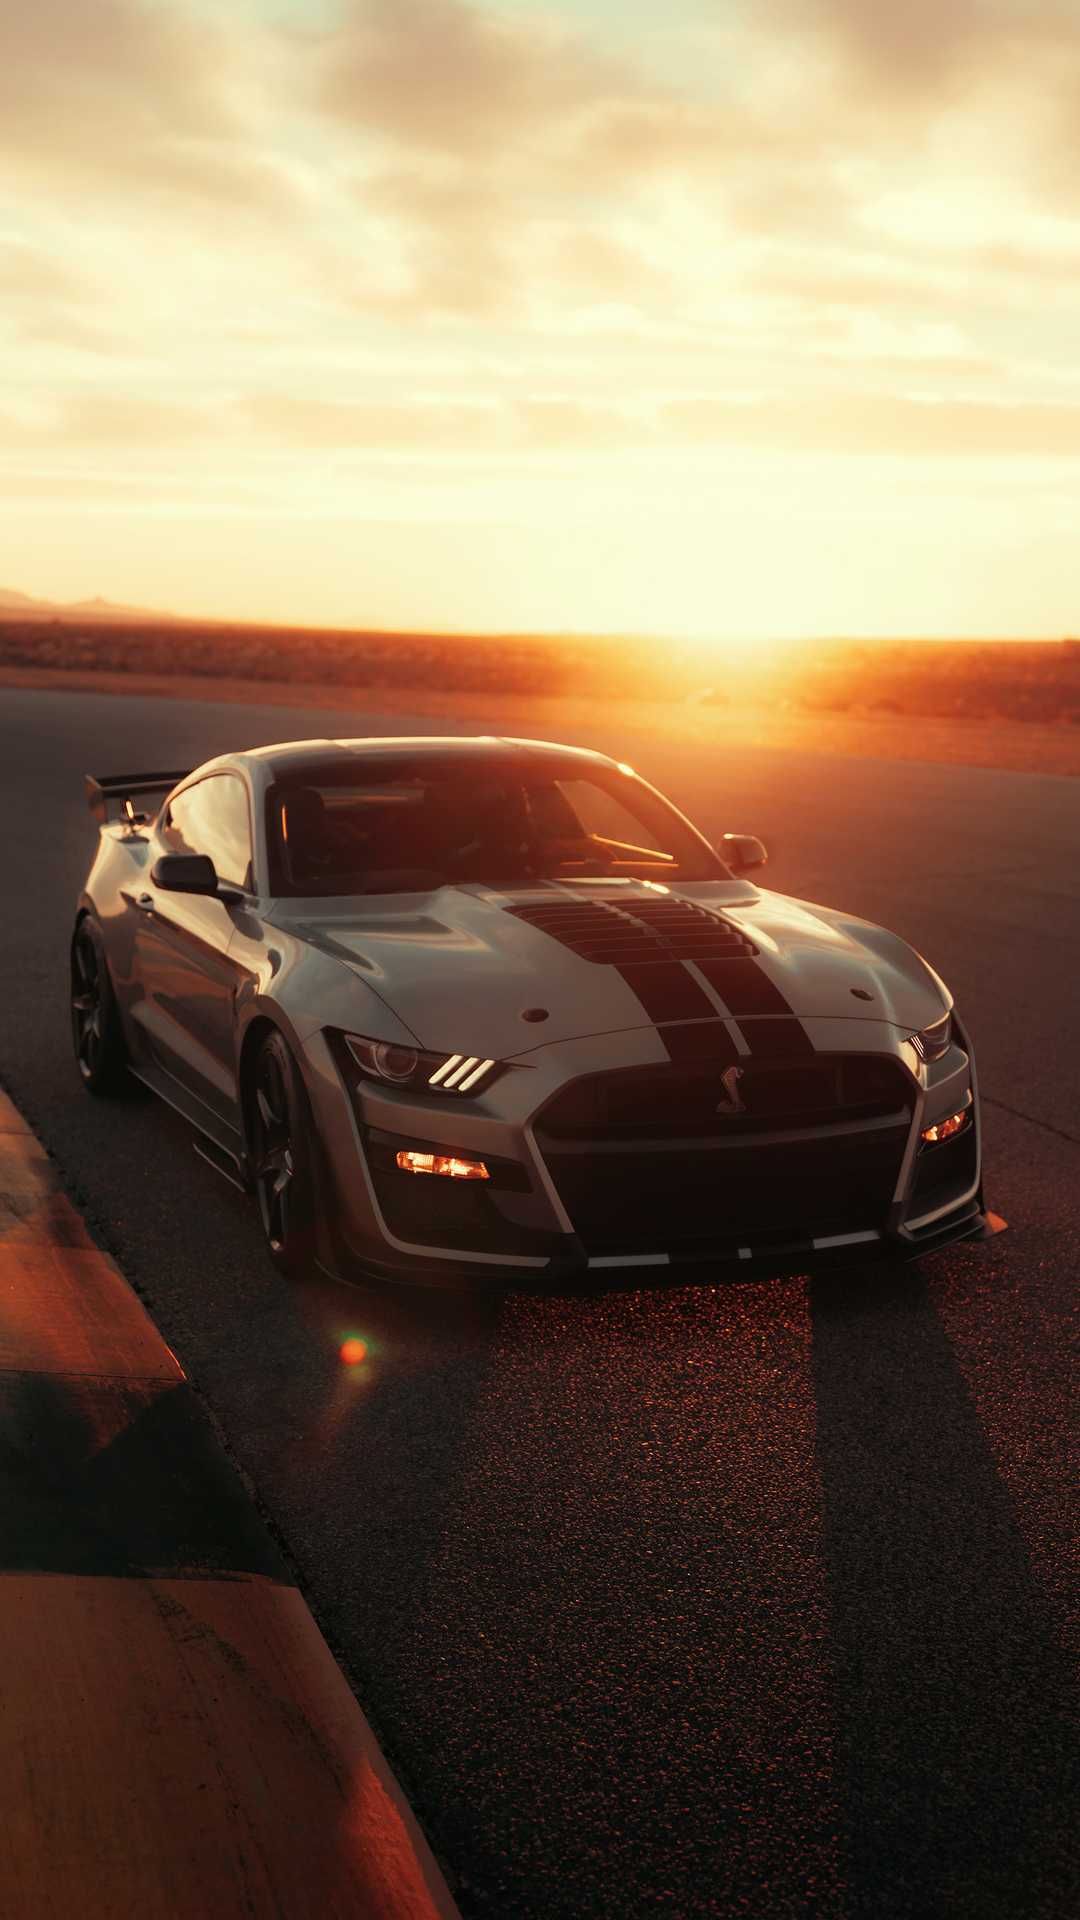 2020 Ford Mustang Gt500 iPhone Wallpaper